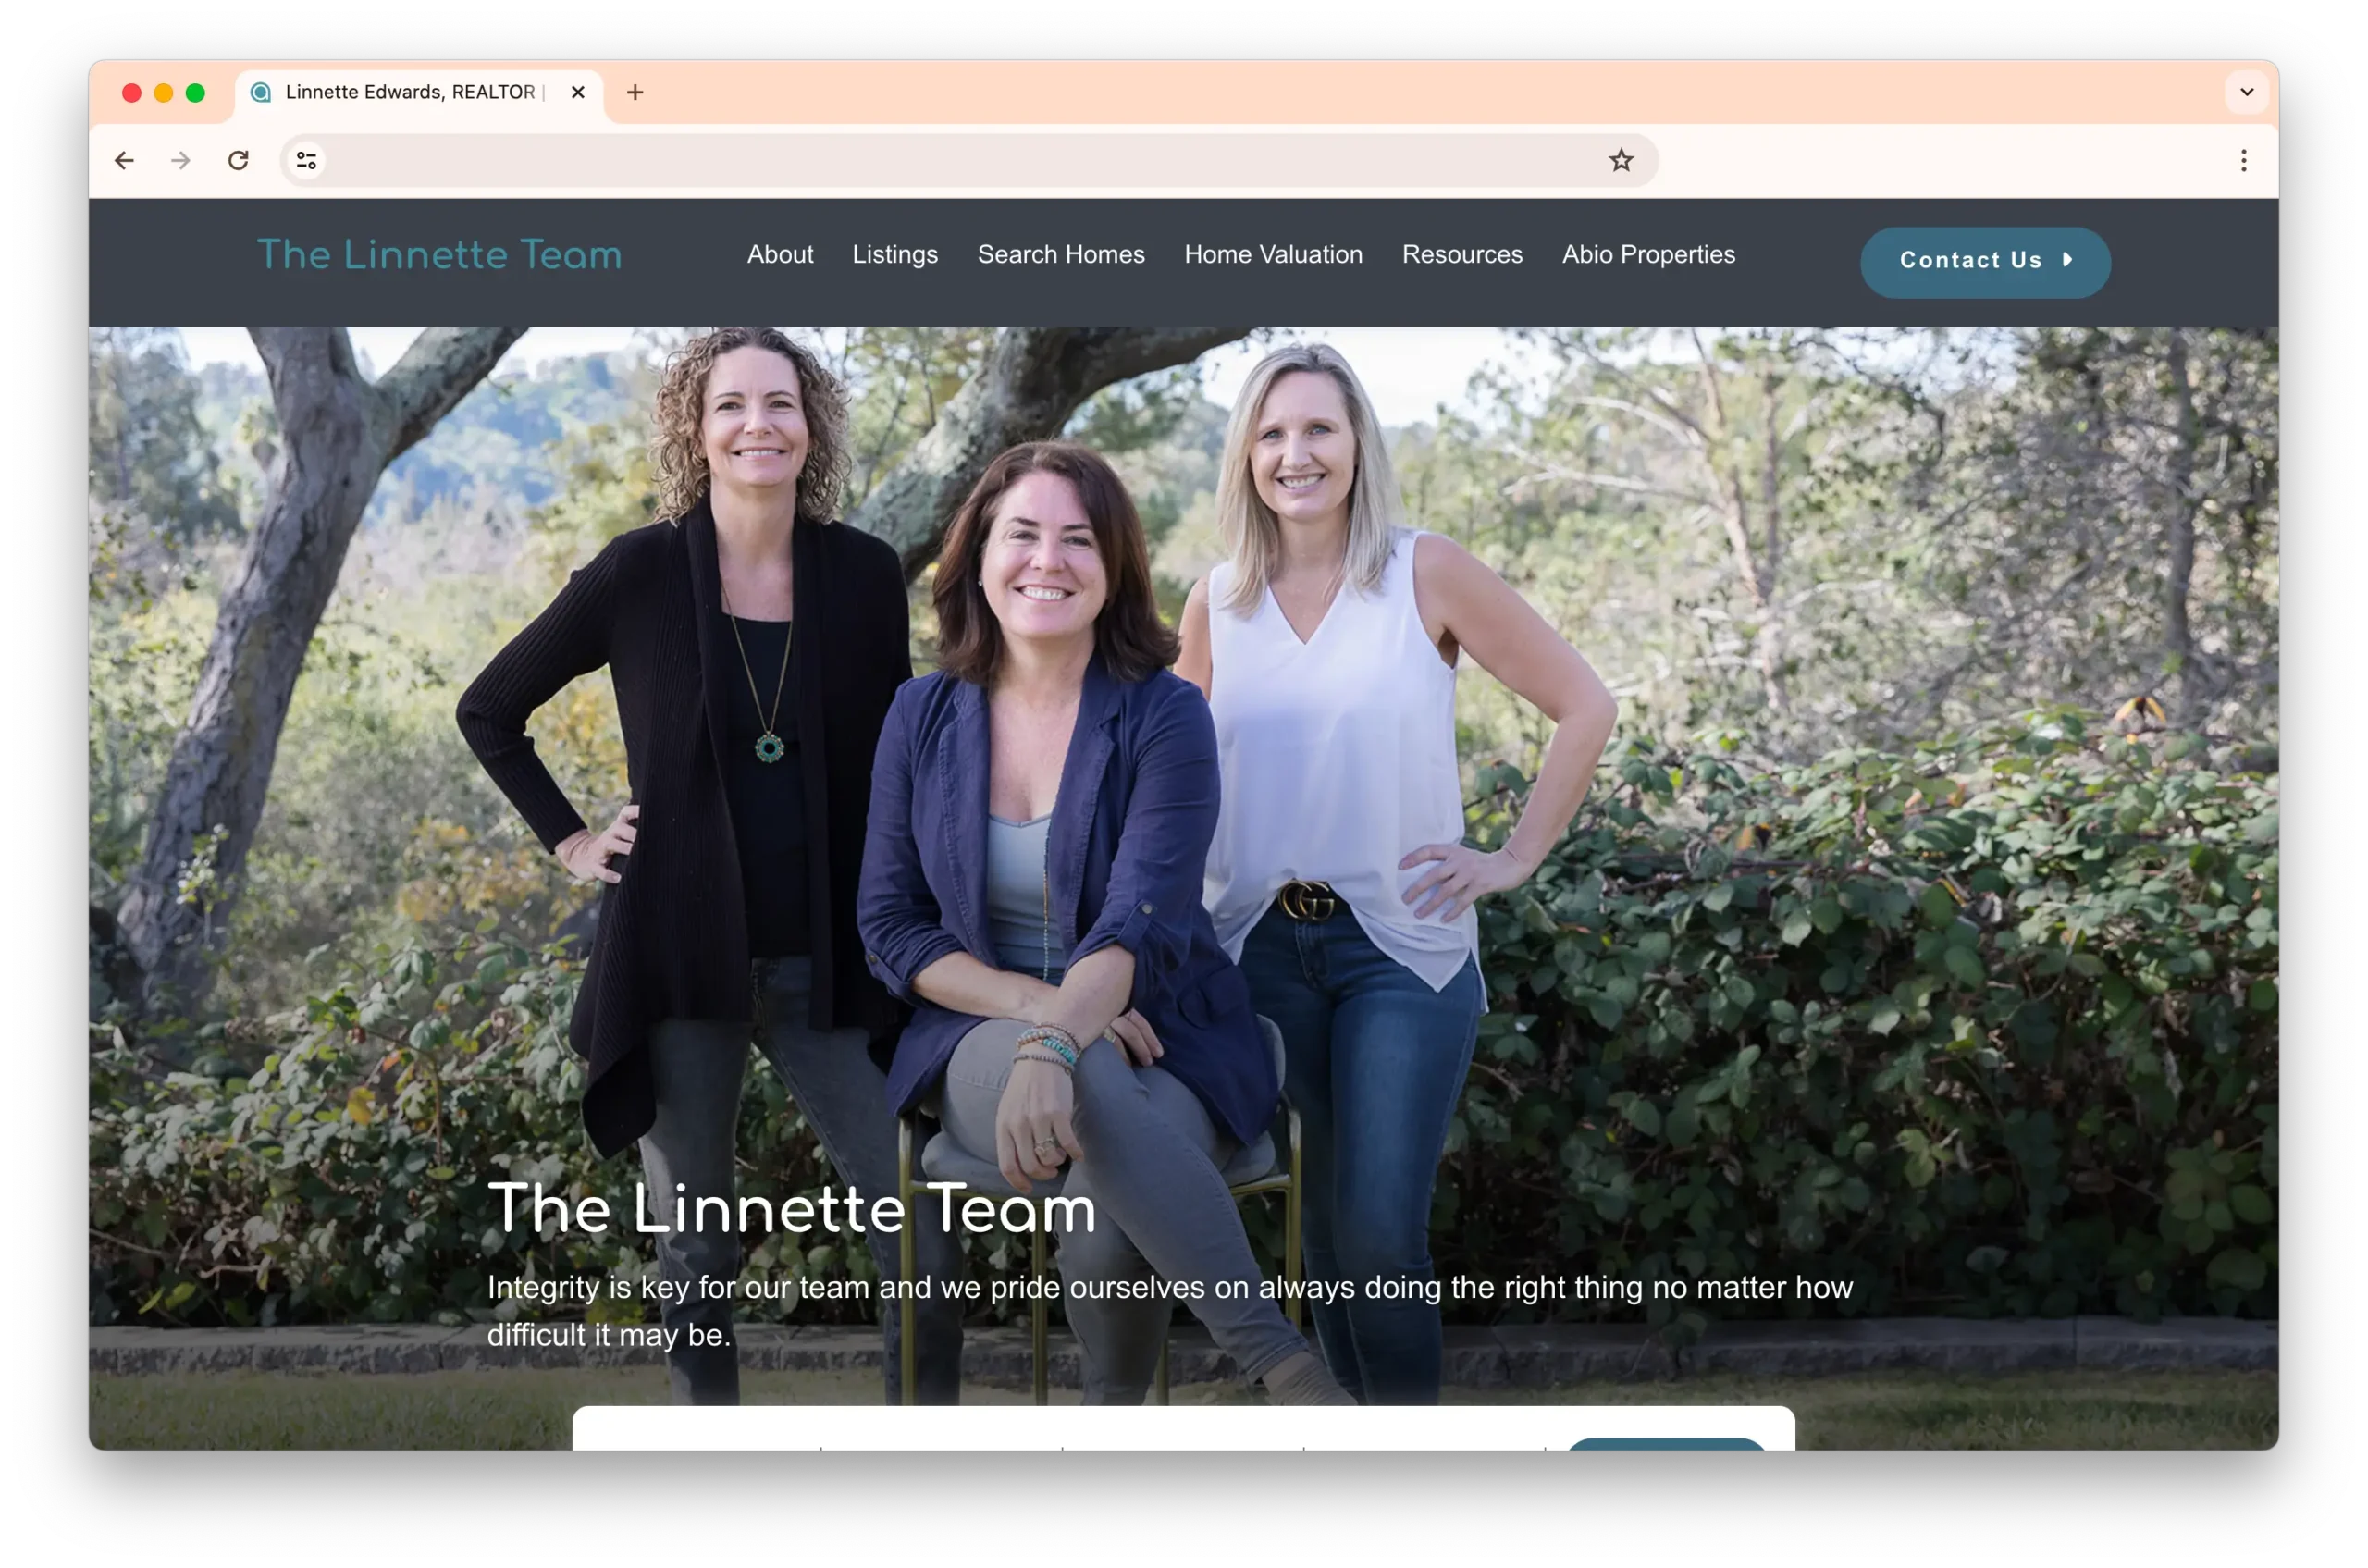 A webpage for The Linnette Team with a banner image of three women, presumably team members, posing outdoors. The text highlights the team's commitment to integrity and doing the right thing.